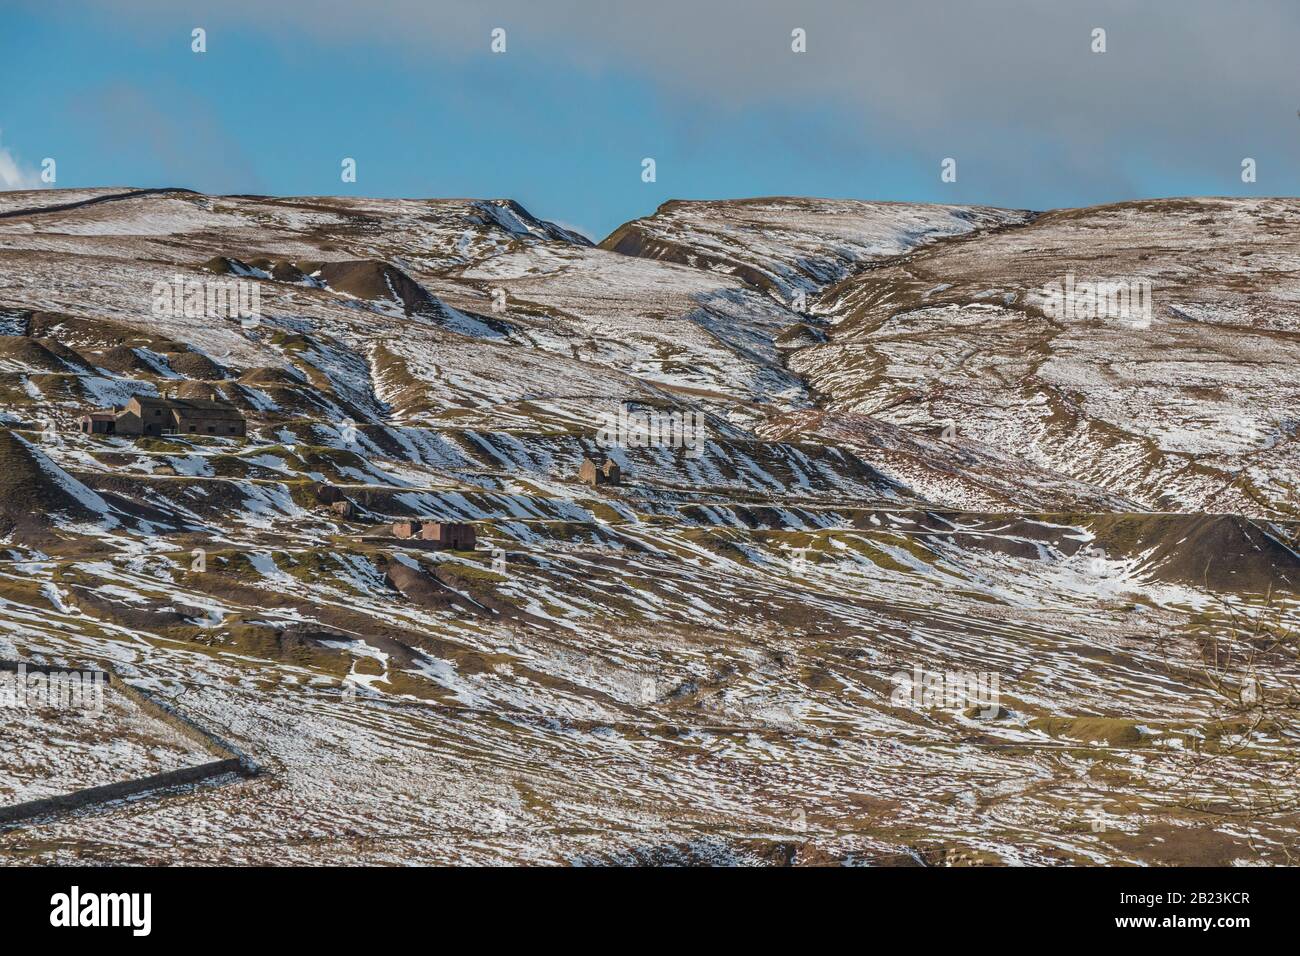 The remains of the Coldberry lead mine in a patchy snow covering, Hudes Hope Valley, Teesdale Stock Photo